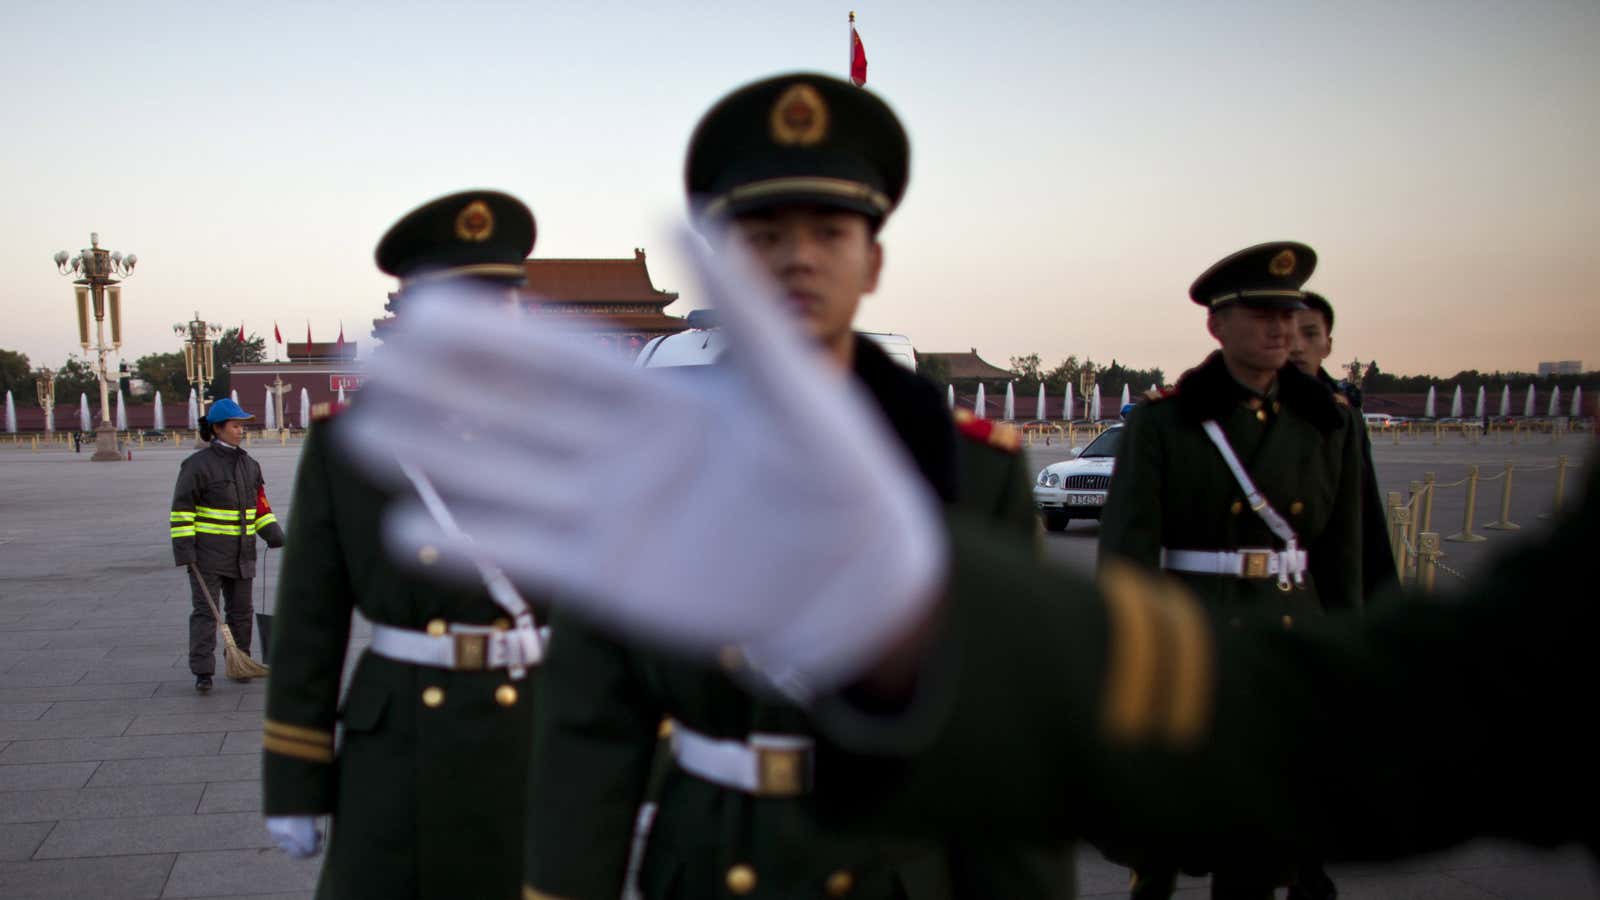 Not so fast. China’s military hasn’t really dominated since the 1400s.